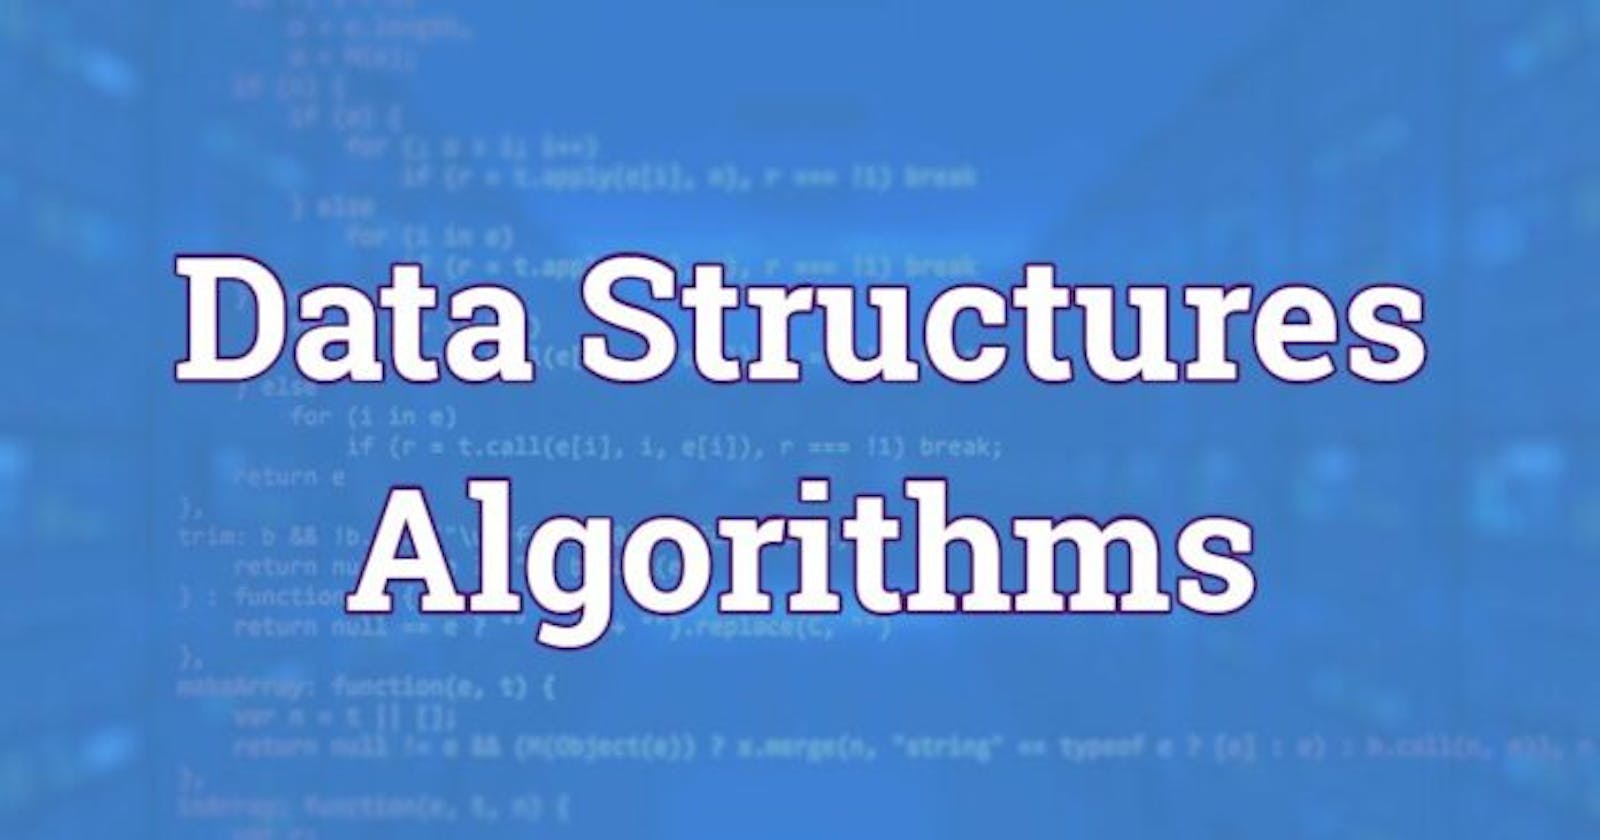 How Important Is Data Structures And Algorithm Knowledge Important For Data Scientist?